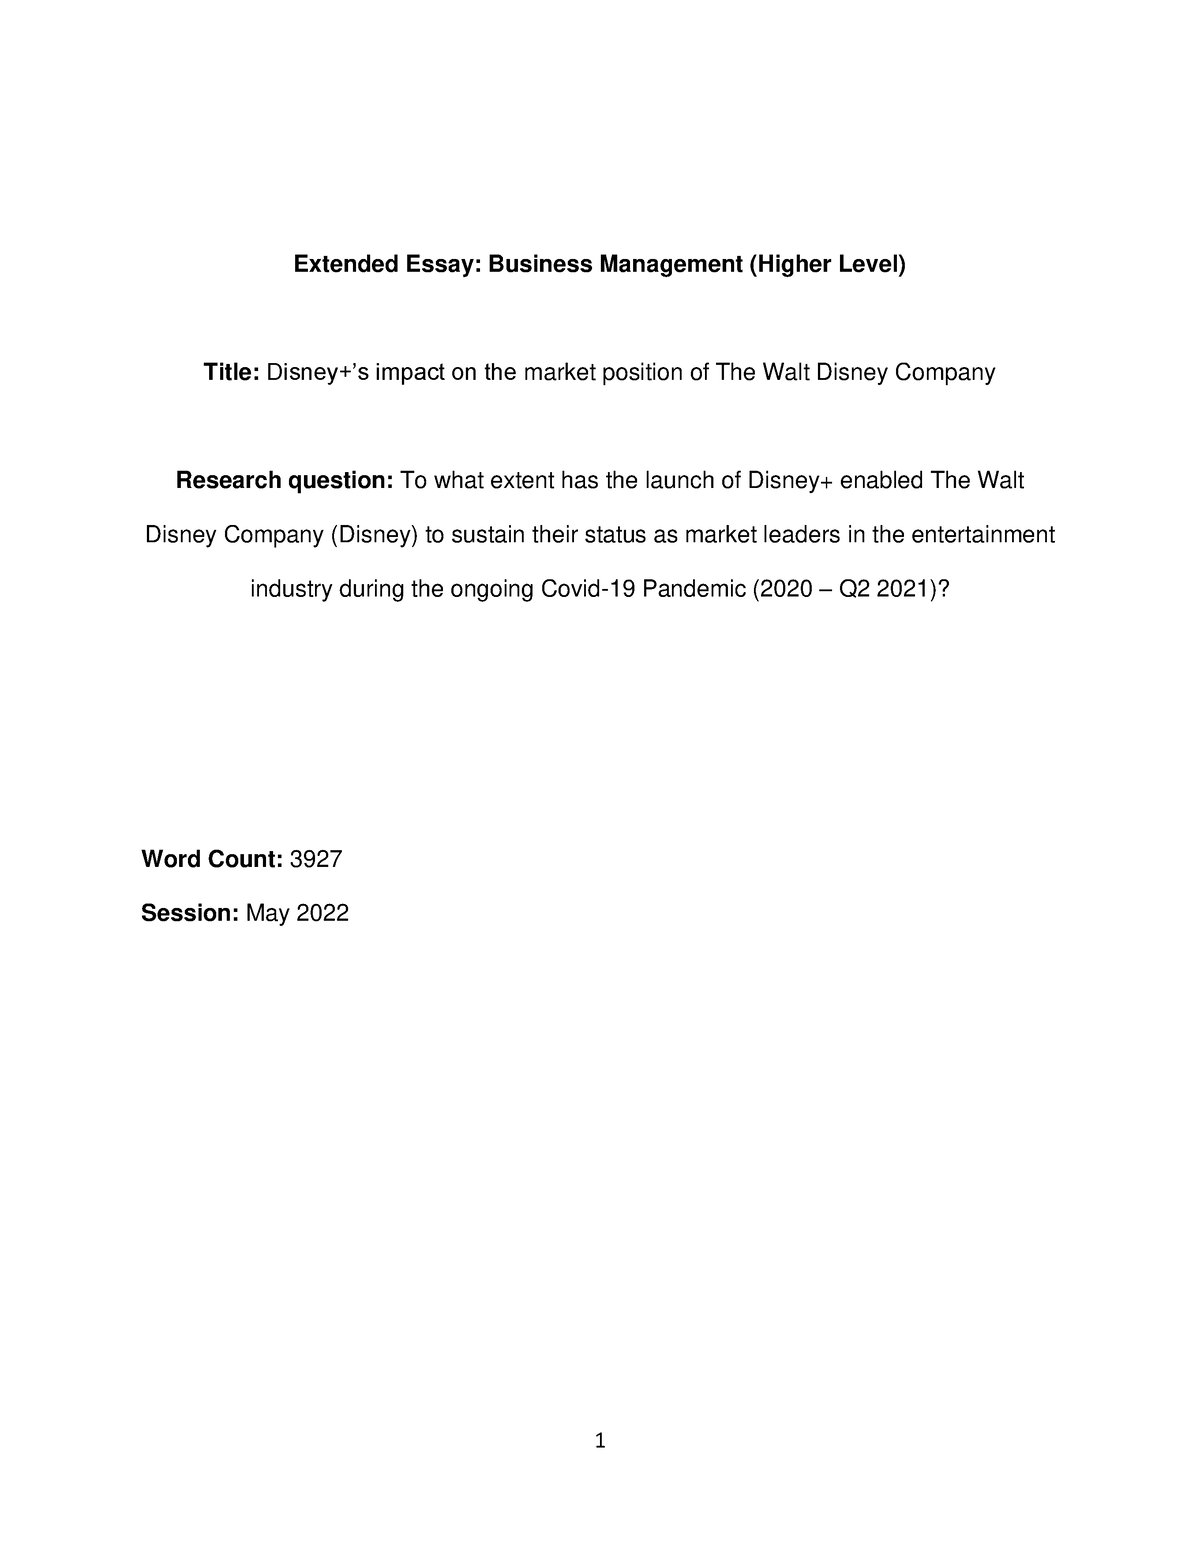 business management extended essay